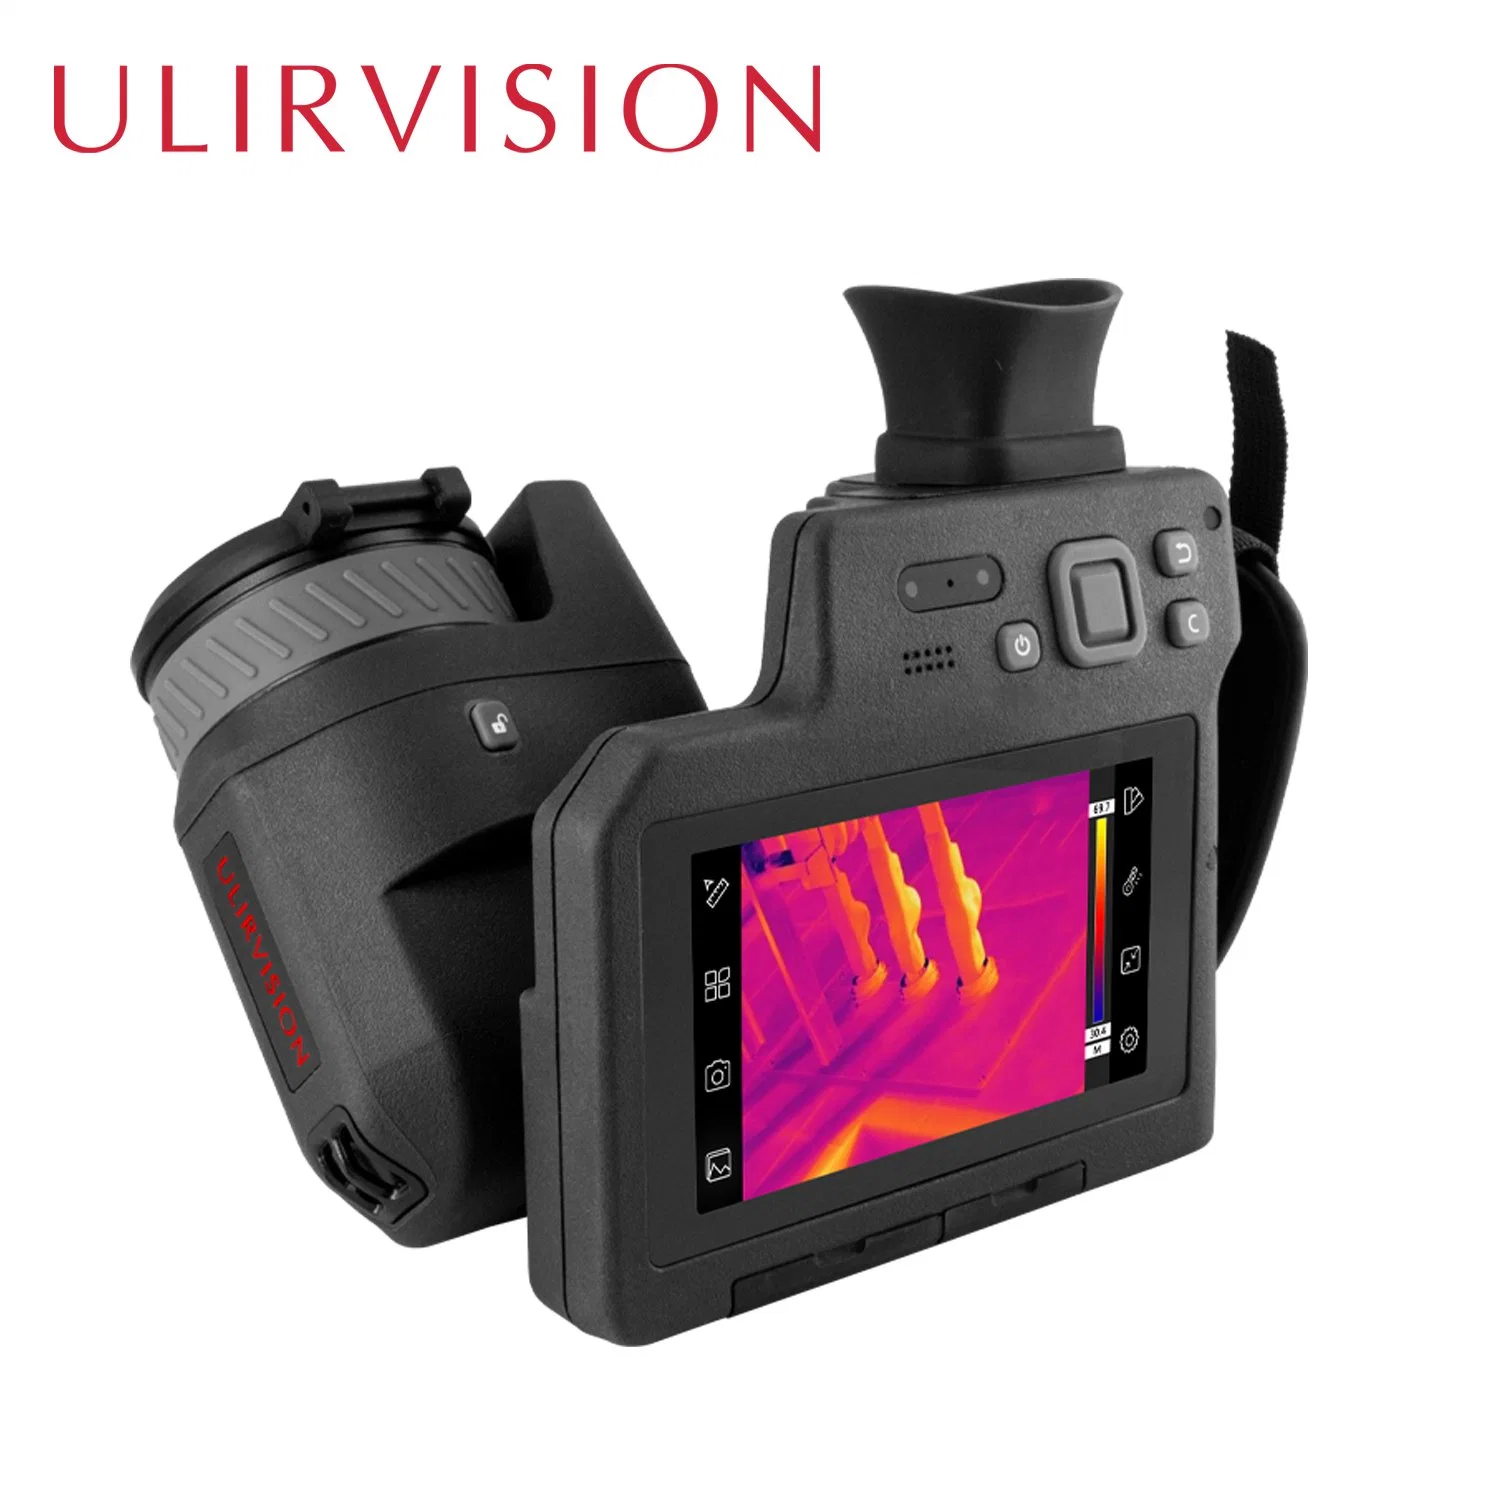 Continuous Auto Focus Infrared Imaging Camera Ulirvision T50|T70 Thermal Imager